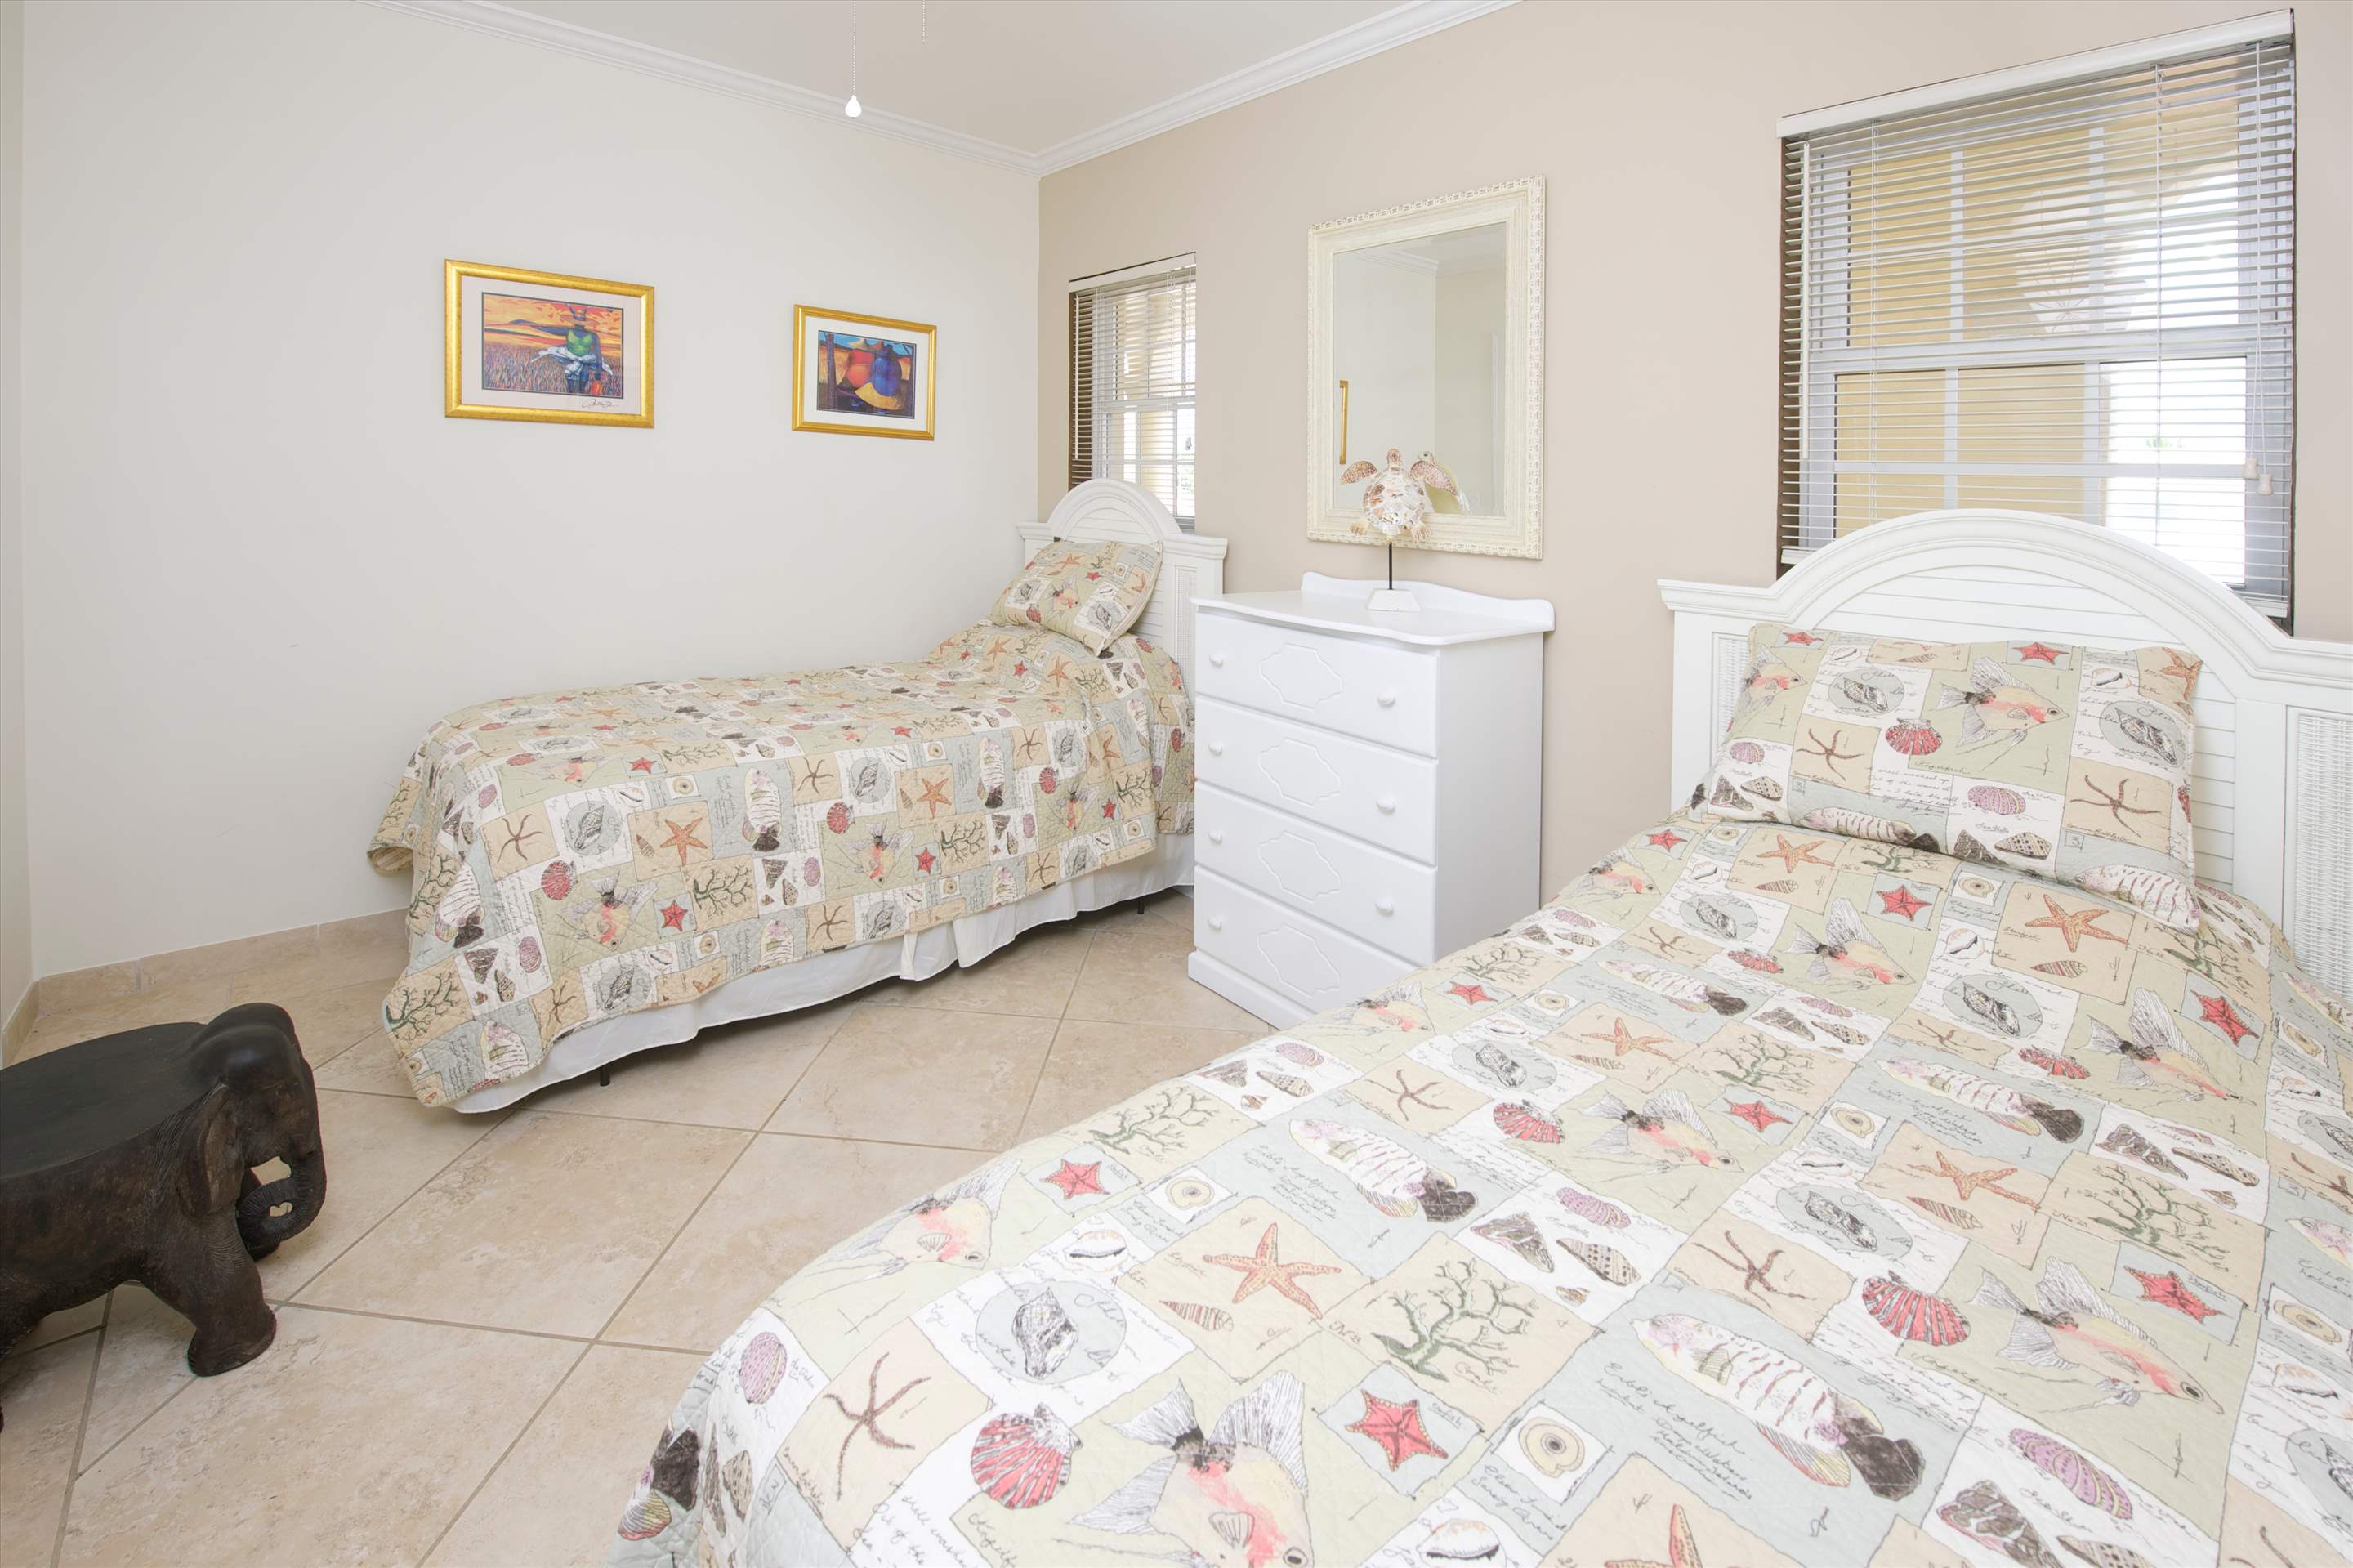 Sapphire Beach 203, 2 bedroom, 3 bedroom apartment in St. Lawrence Gap & South Coast, Barbados Photo #16